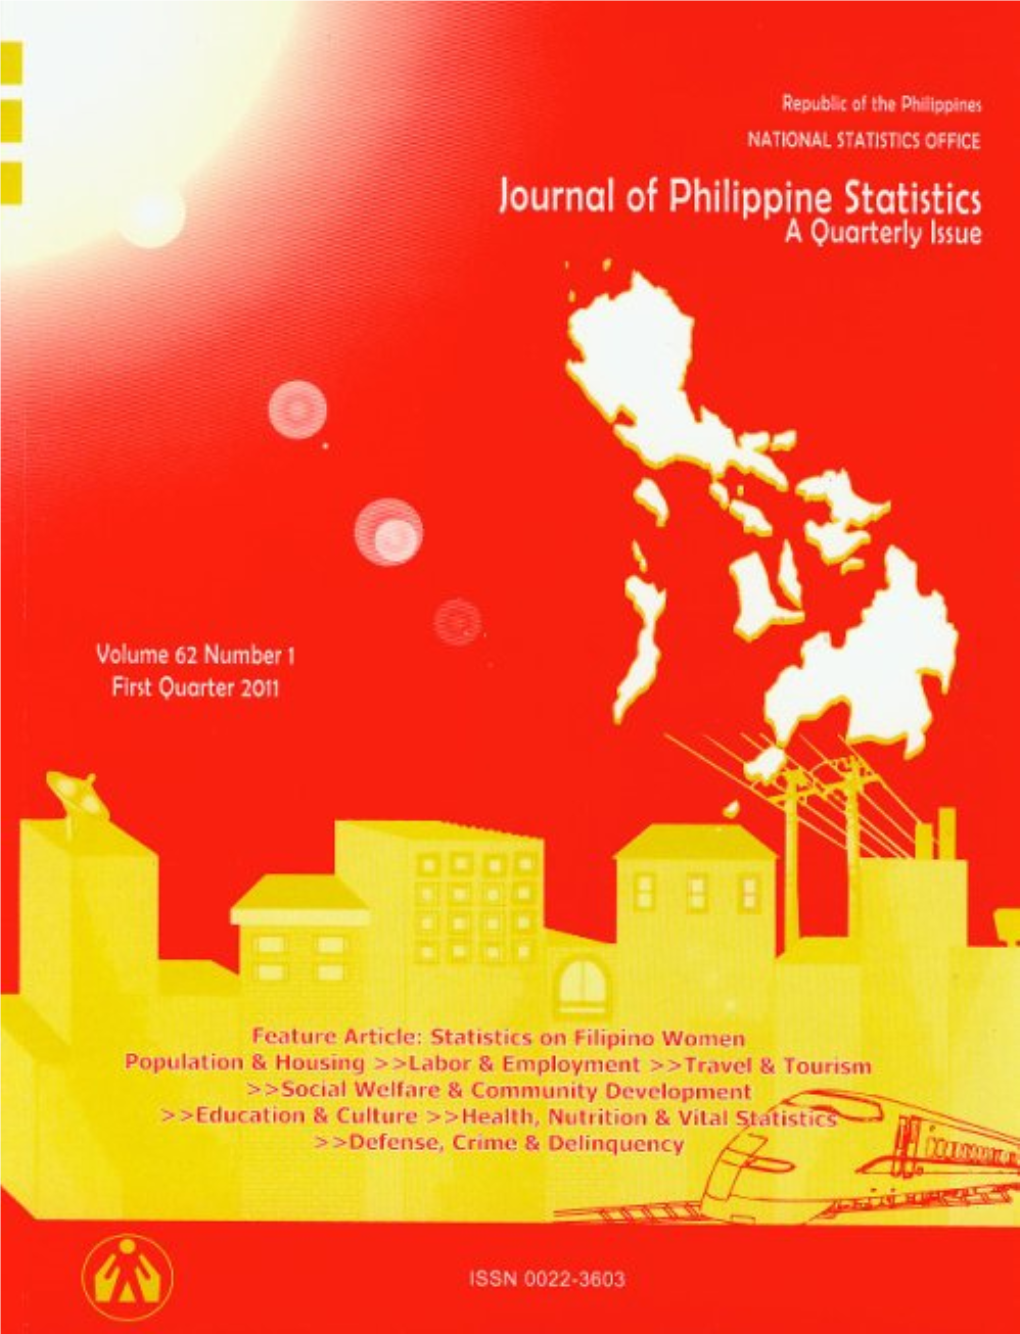 Journal of Philippine Statistics (JPS) Is a Quarterly Publication of the National Statistics Office (NSO)